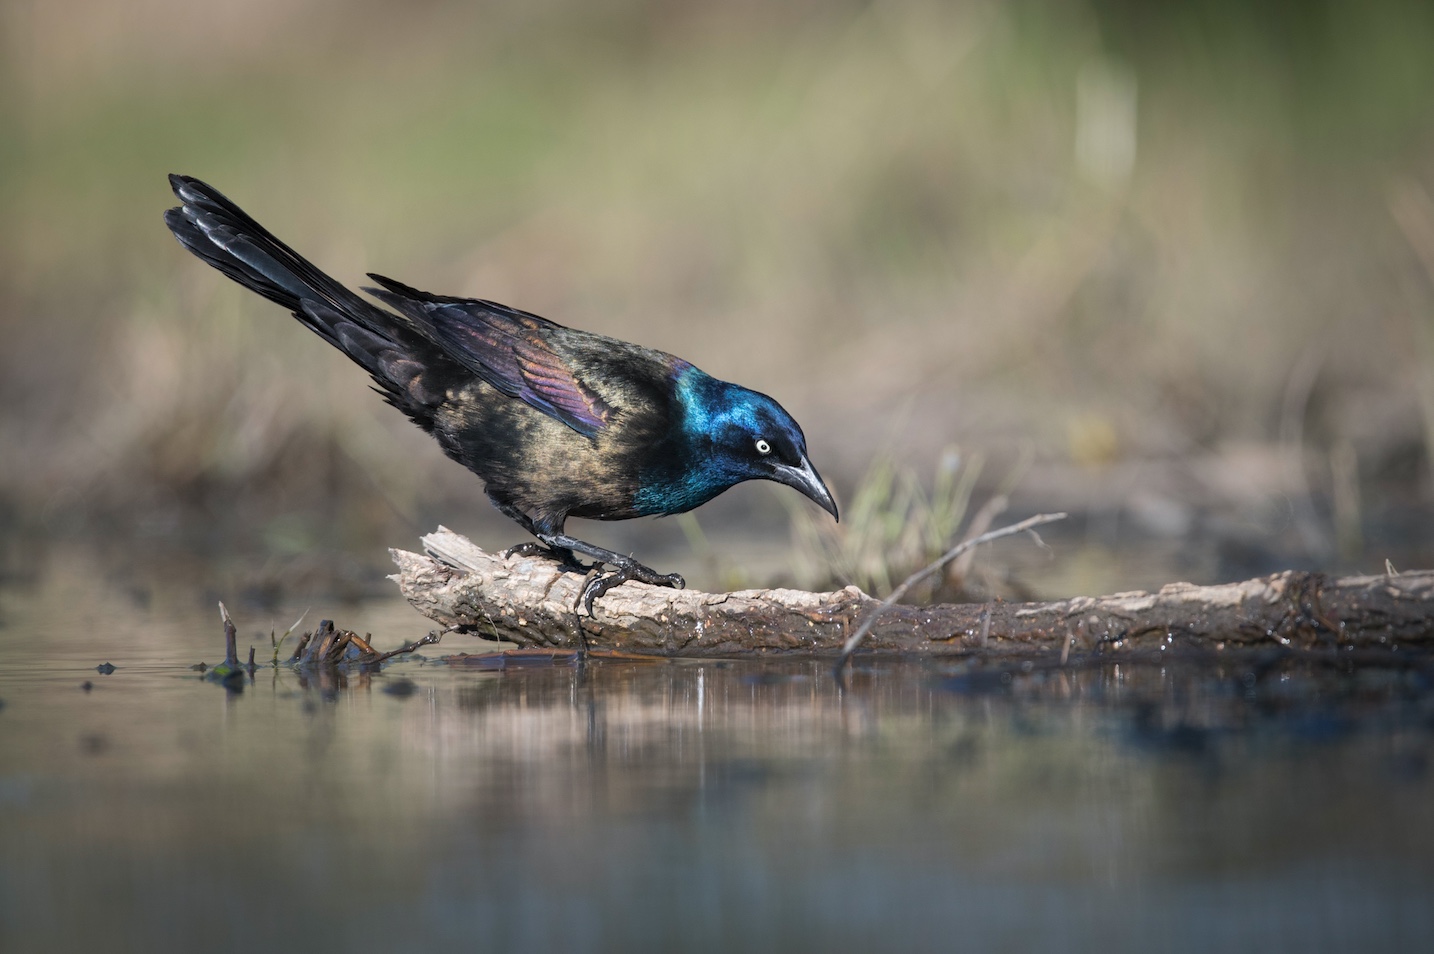 Common Grackles can be identified by their iridescent blue heads.